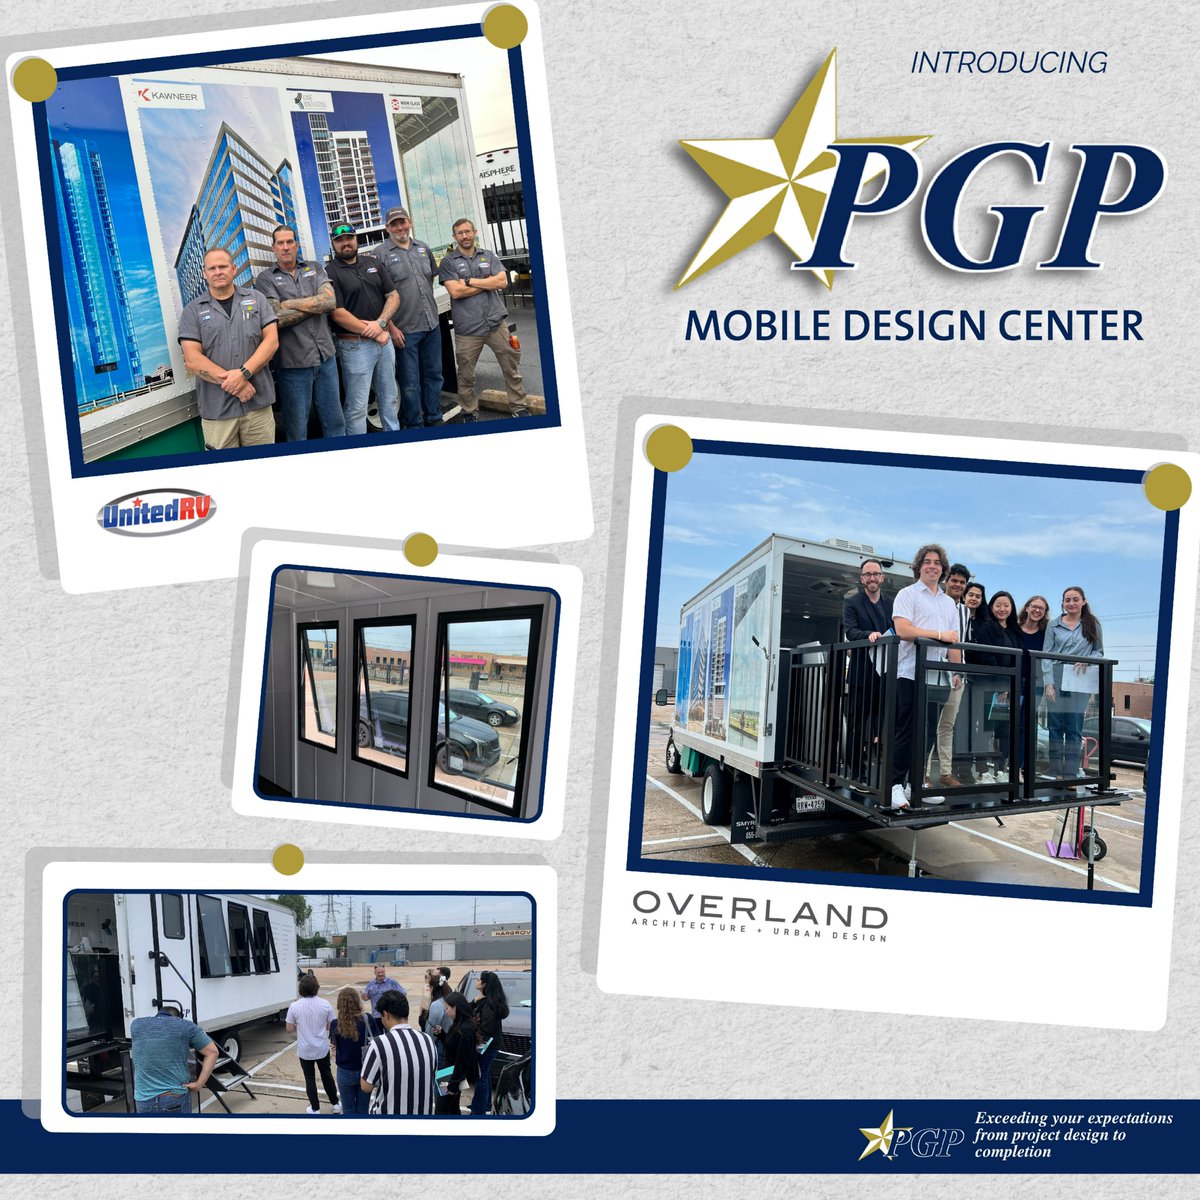 10:30AM: PICK UP TRUCK ☑ 11:15AM: FIRST TRUCK VIEWING ☑ INTRODUCING THE PGP-USA MOBILE DESIGN CENTER ! We want to thank @UnitedRV for your weeks of preparation on the truck & to @OverlandPartner for being our first group to tour the PGP Mobile Design Center! Let's Roll!